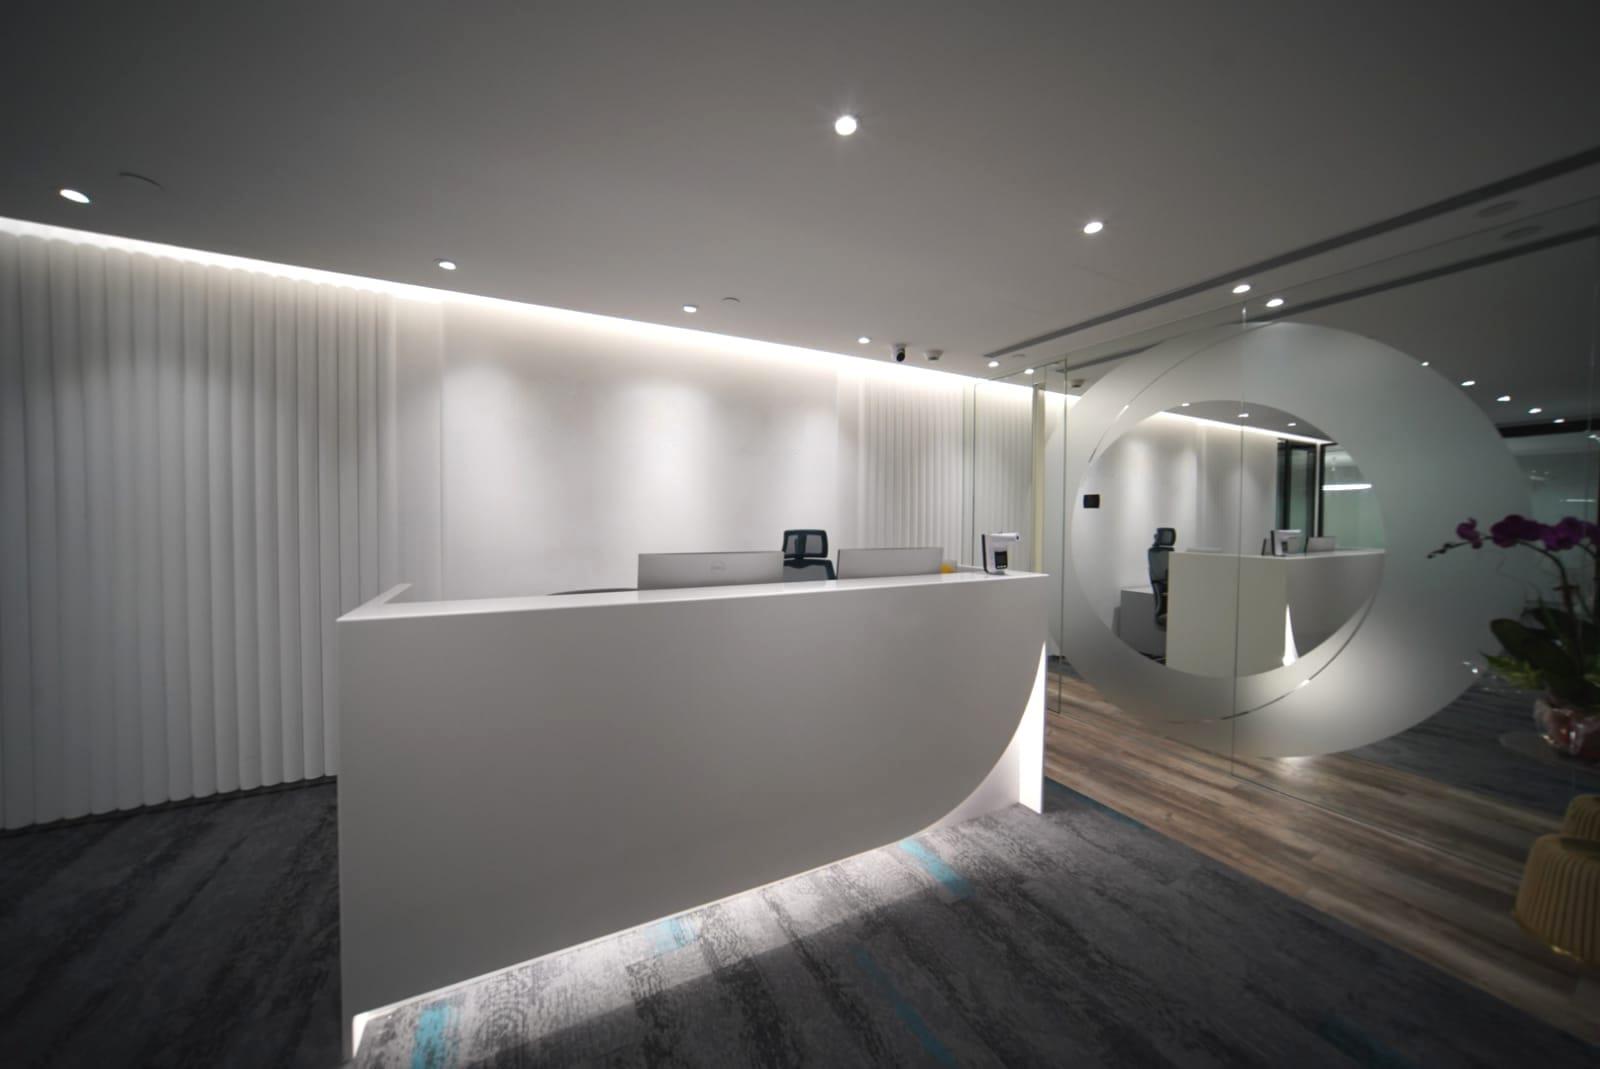 This 3,228-sq-ft Office Space in Central Showcases the Beauty of Geometric Design 